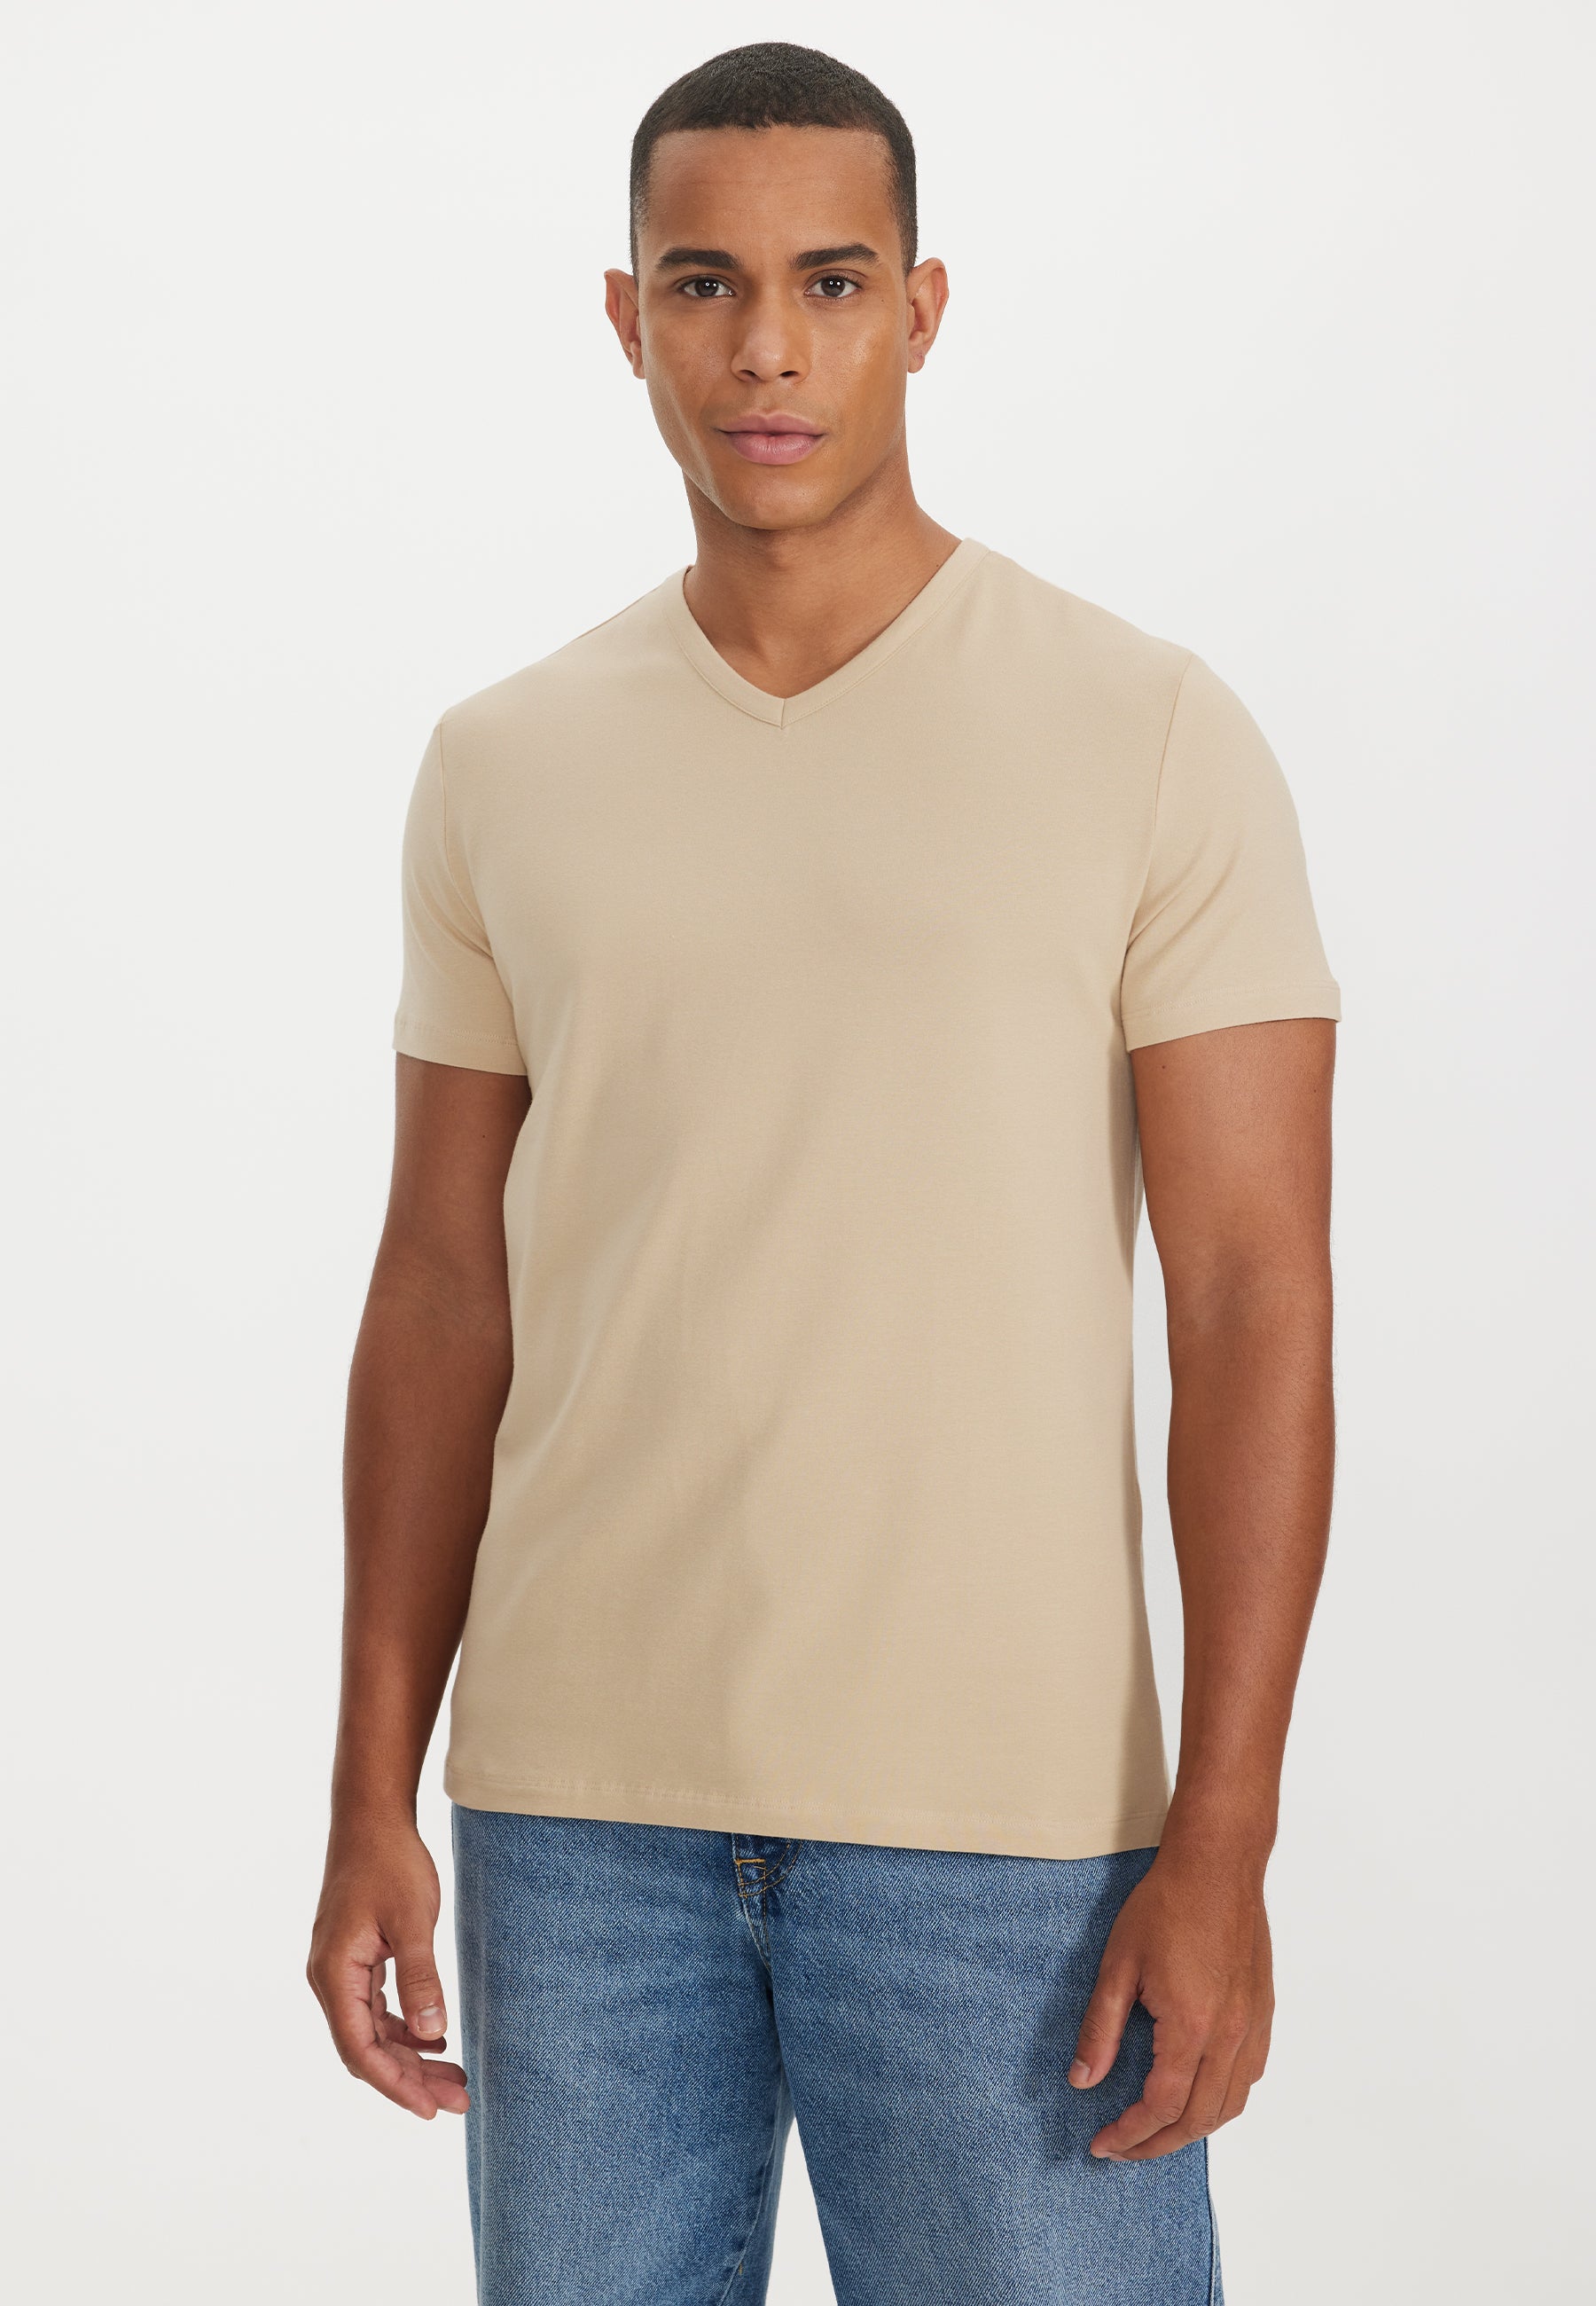 THEO V-NECK TEE in Sand